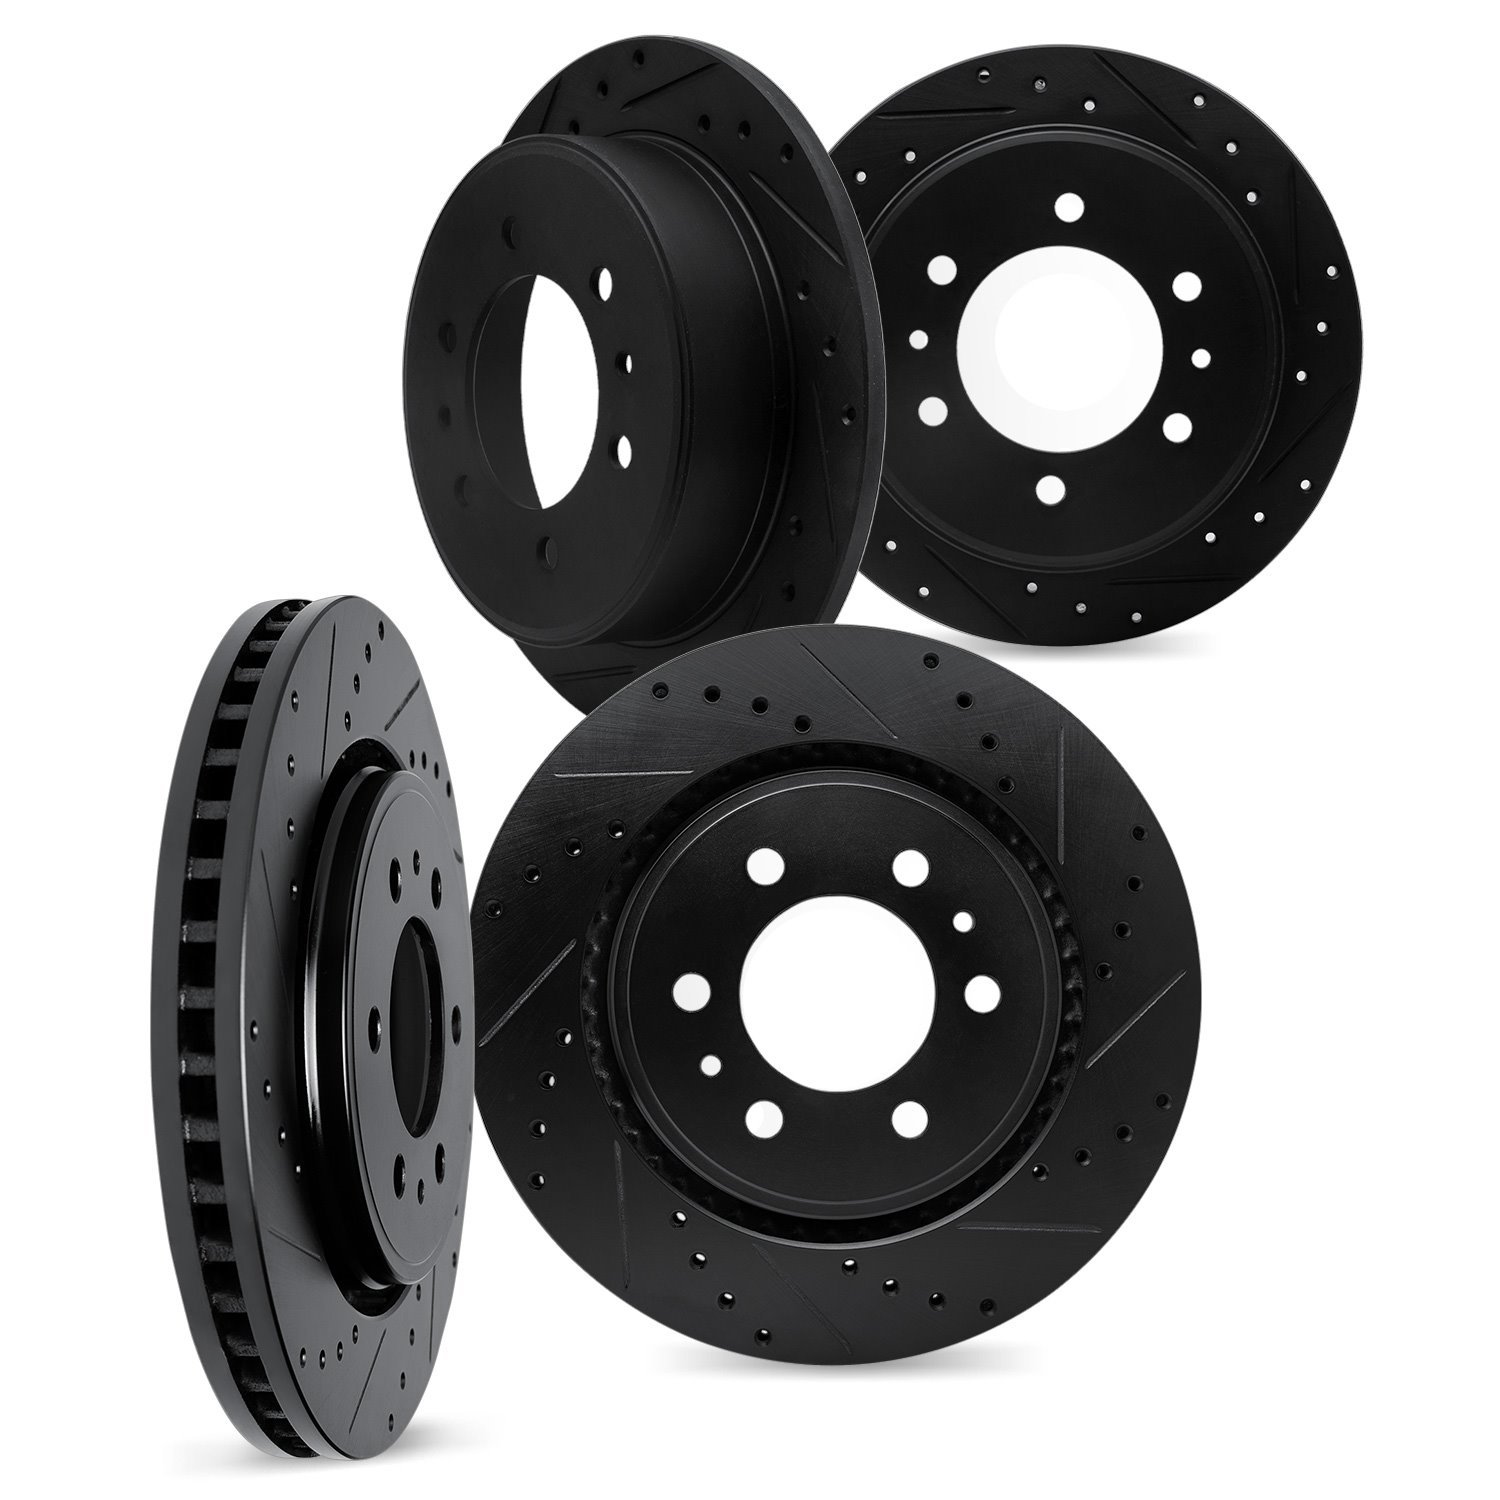 8004-72077 Drilled/Slotted Brake Rotors [Black], 1998-2004 Mitsubishi, Position: Front and Rear